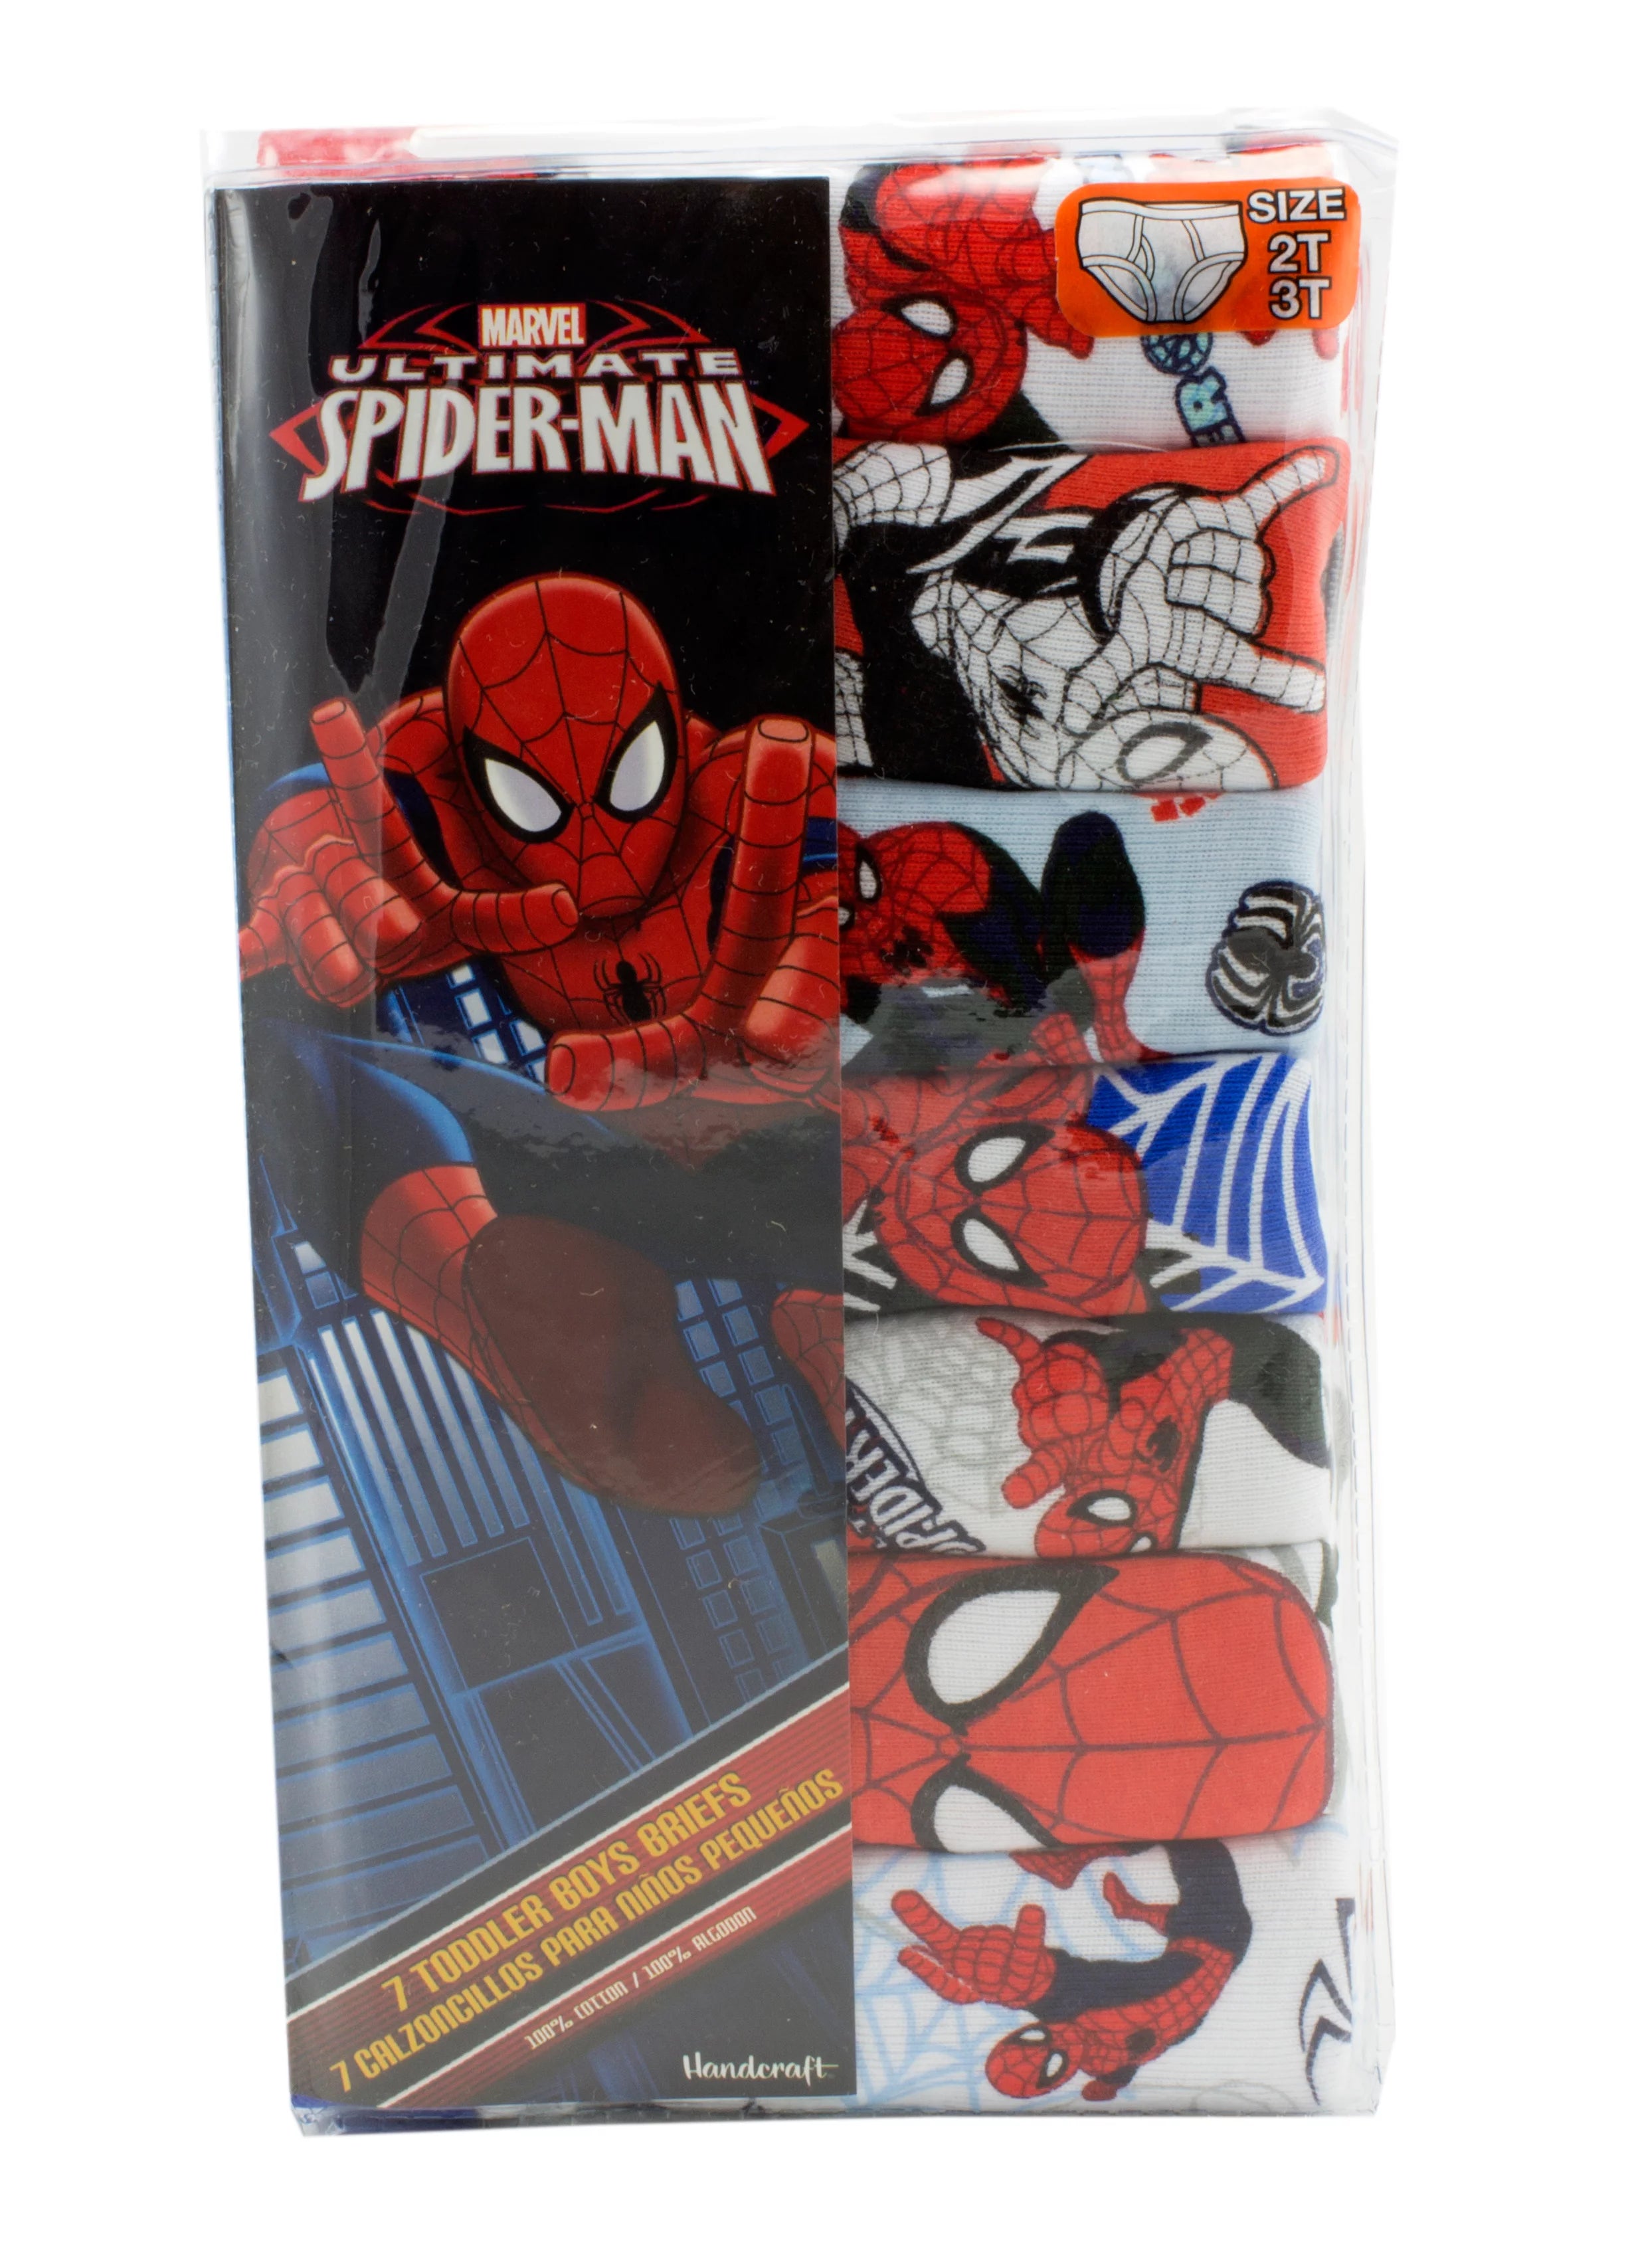 Spiderman Toddler Boys Boxer Briefs, 3 Pack, Sizes 2T-4T 